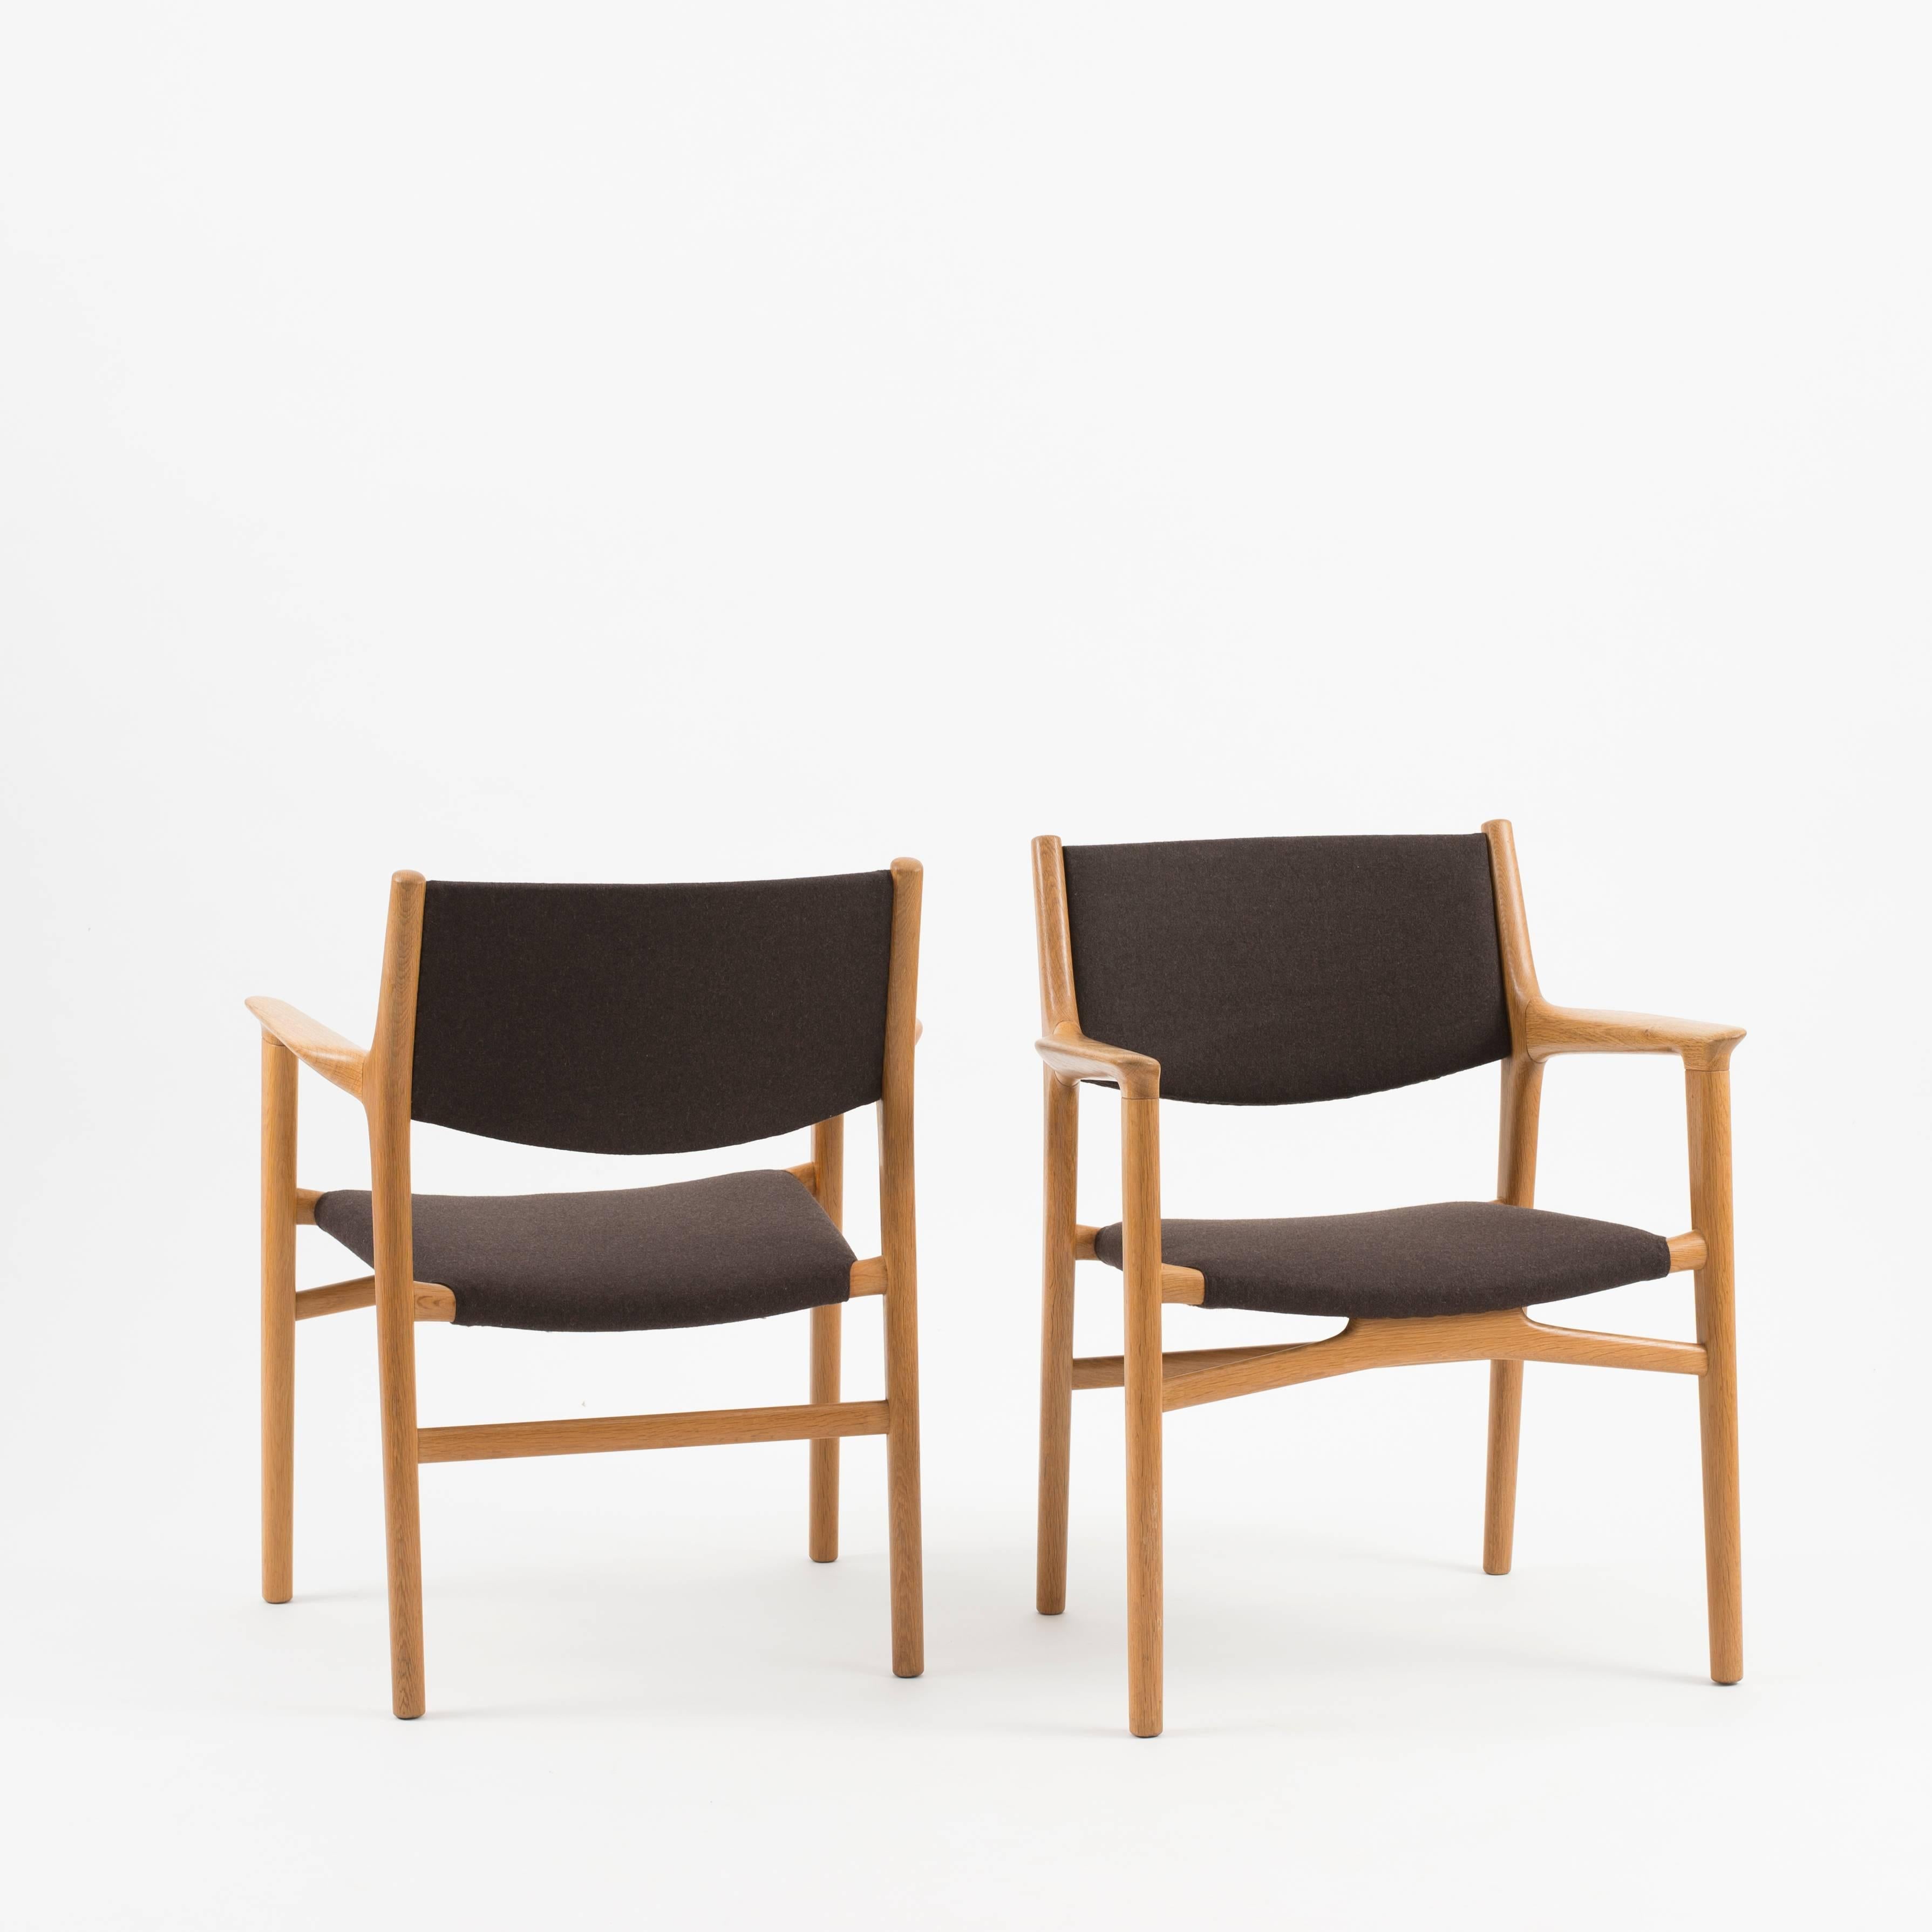 Hans J. Wegner model JH 515. A pair of oak armchairs. Seat and back upholstered with brown felted wool. Executed by cabinetmaker Johannes Hansen, Denmark.